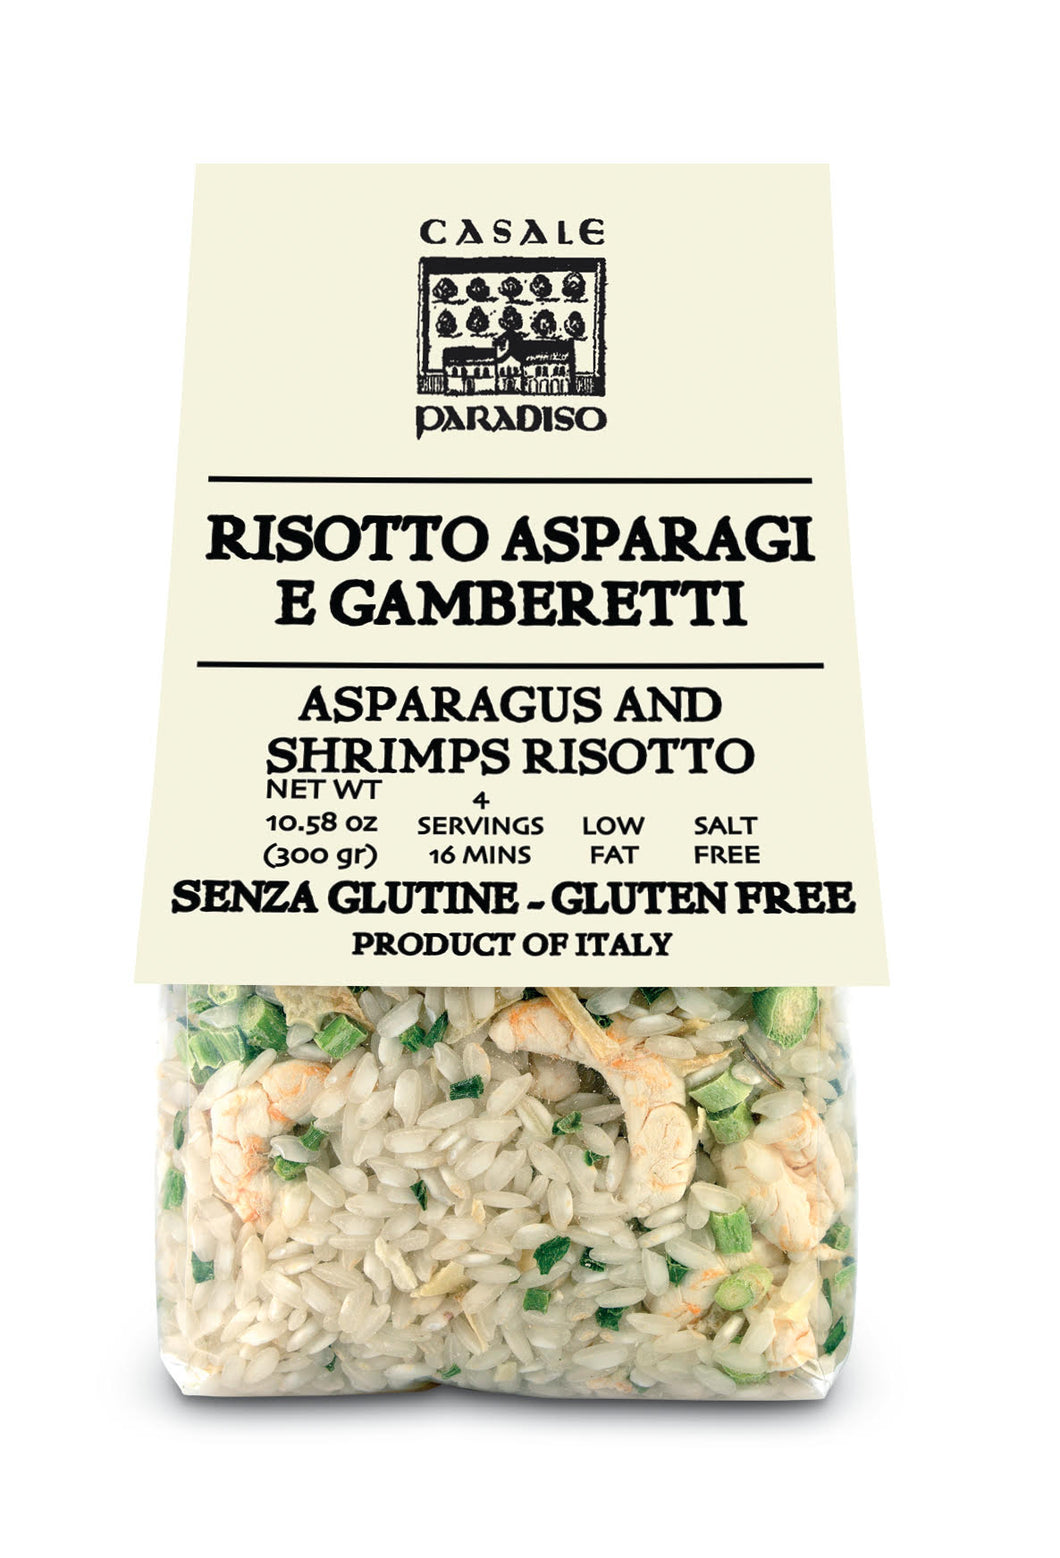 Risotto Asoaragi E Gamberetti- Risotto with Asparagus and Shrimps By Casale Paradiso